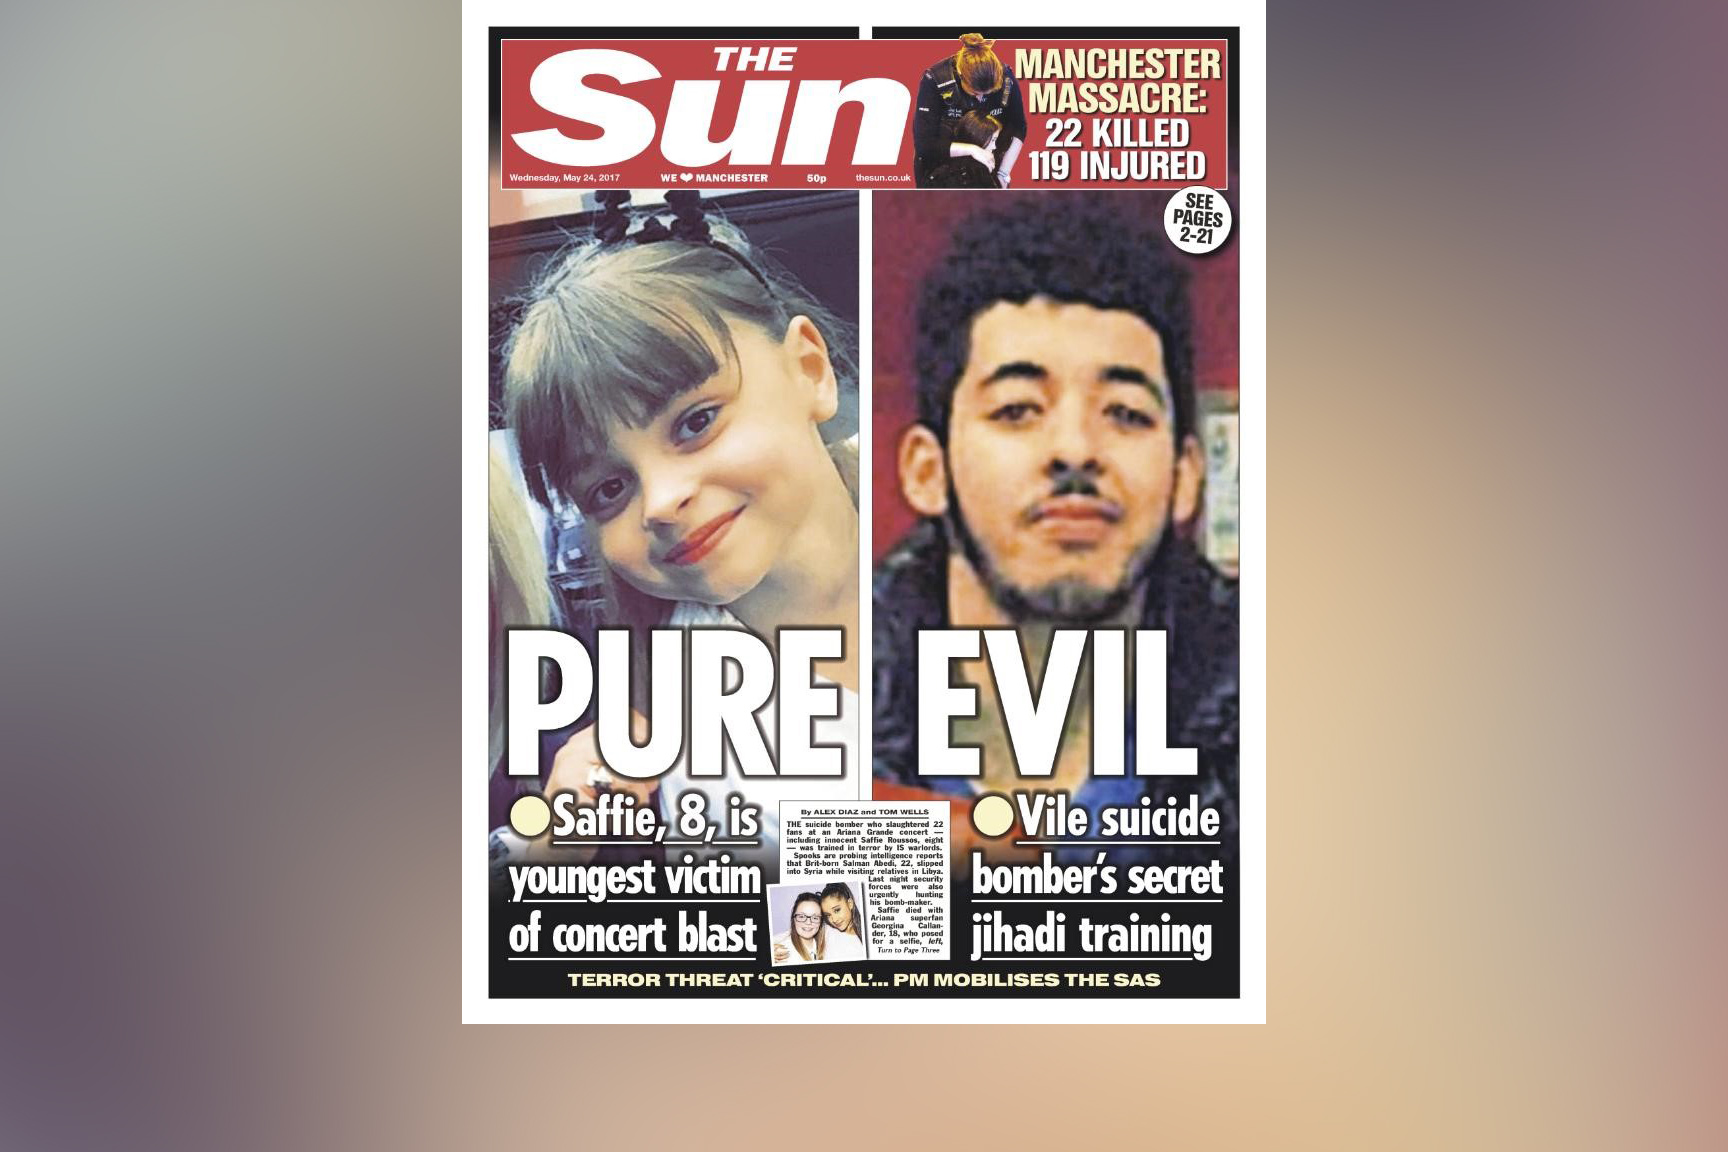 PHOTO: The cover of the May 24, 2017 issue of the British newspaper The Sun, features a photo of suspected attacker Salman Abedi. 